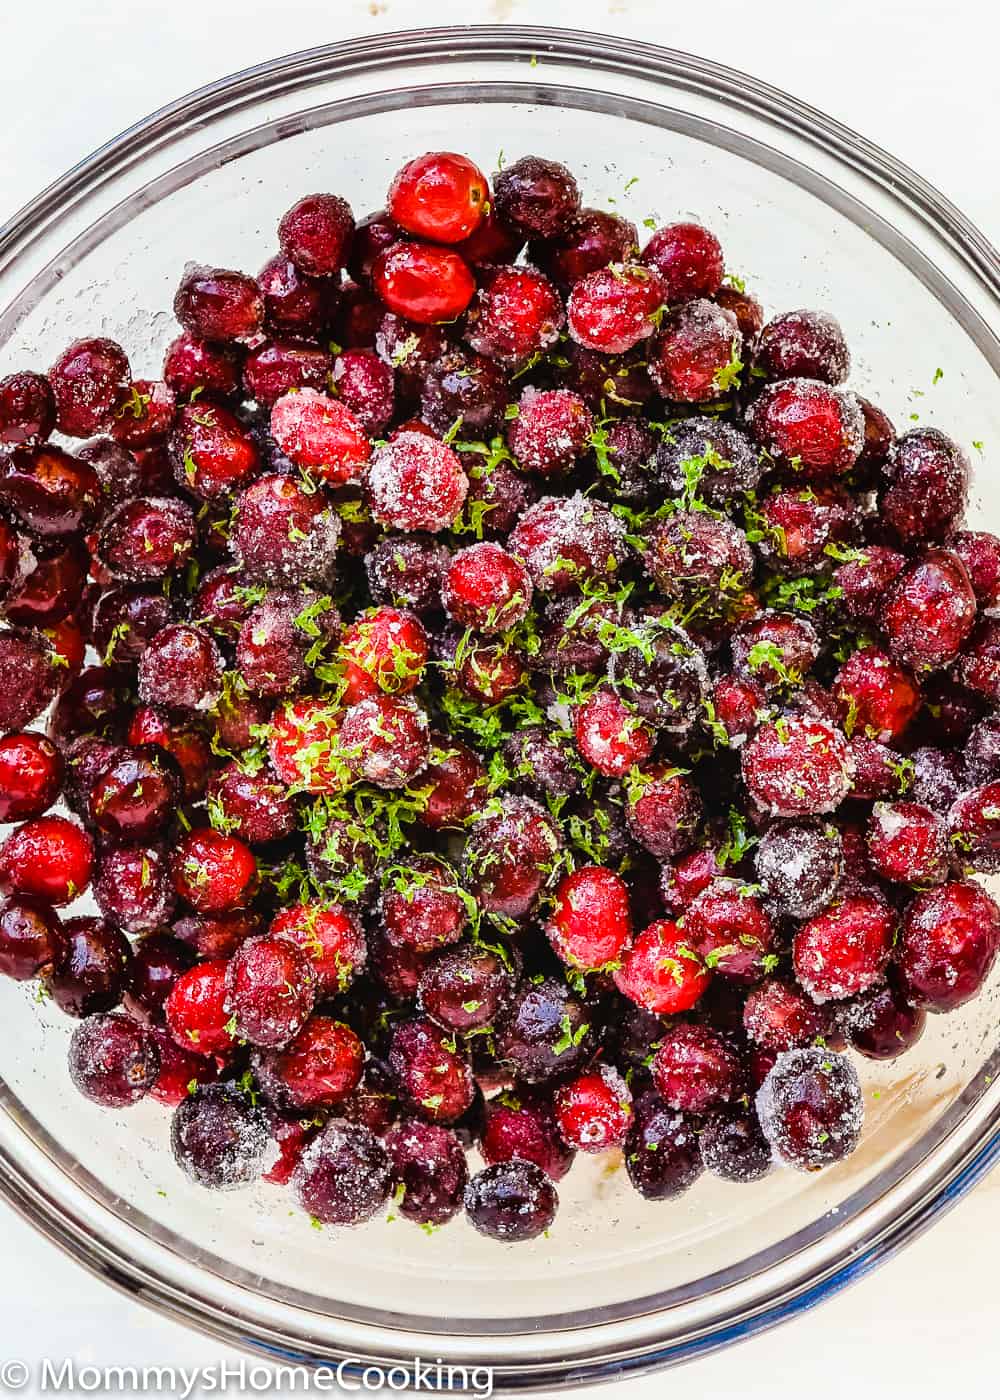 How to make cranberry syrup